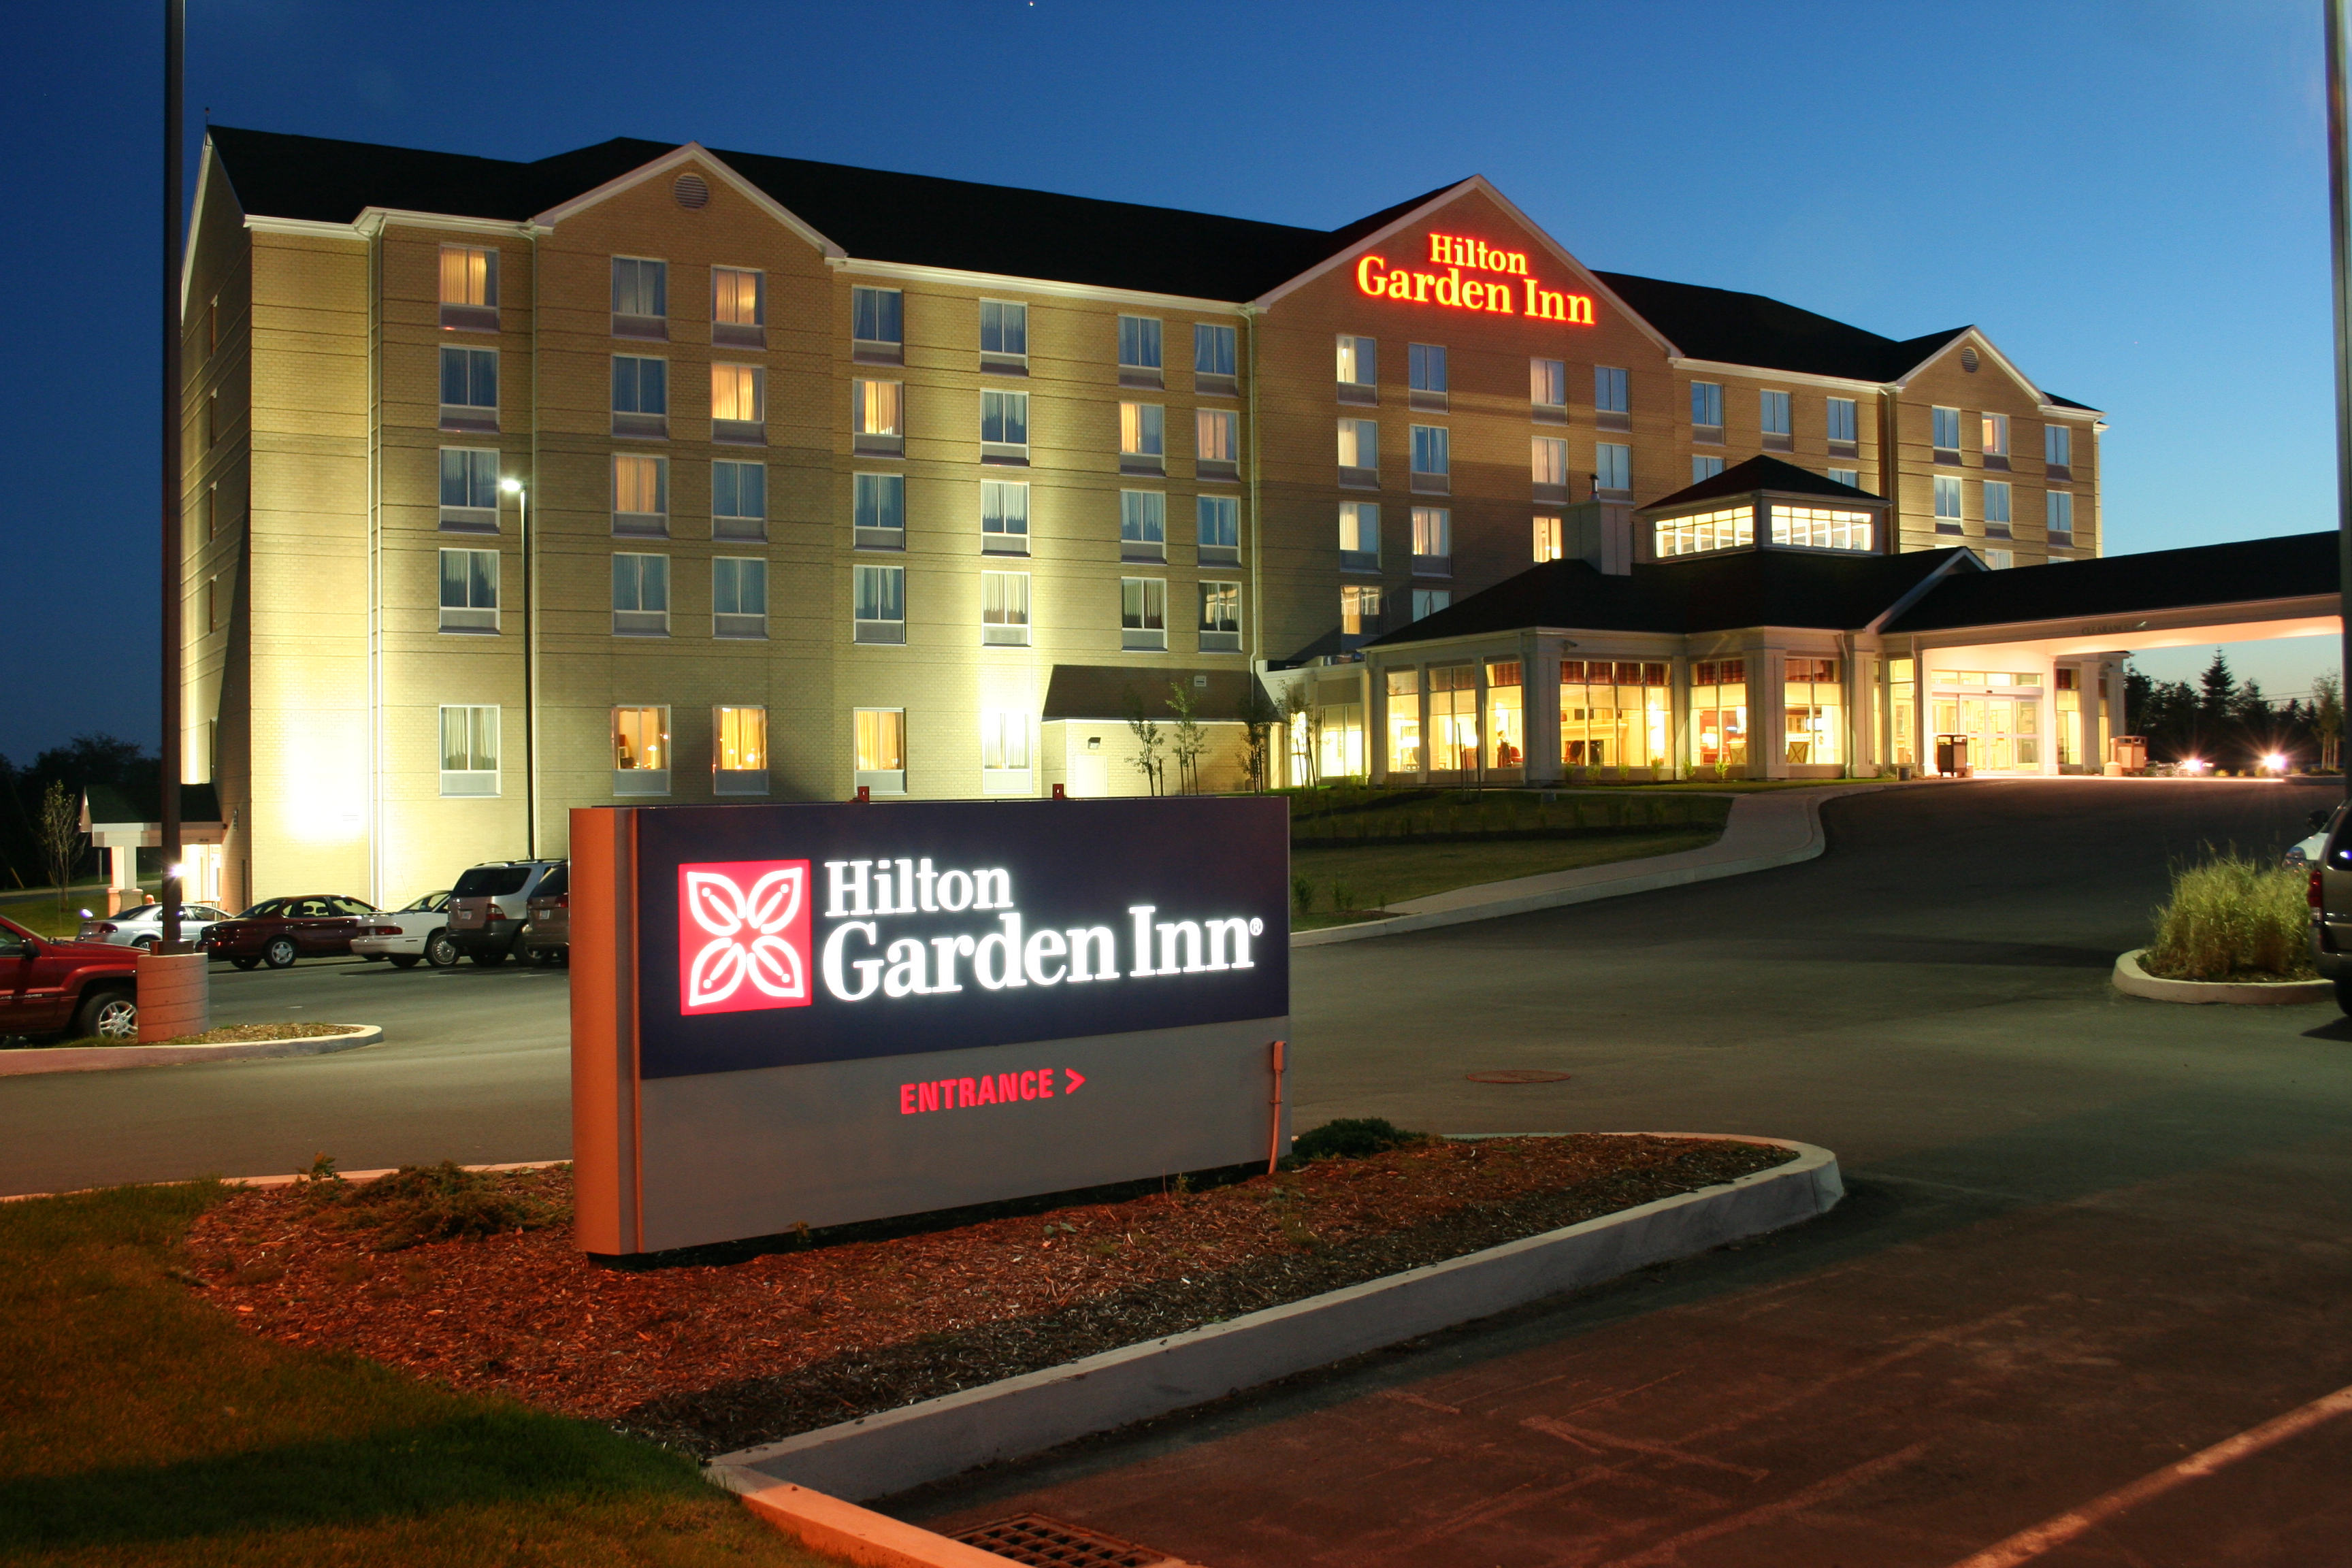 Sign and Exterior of Hotel